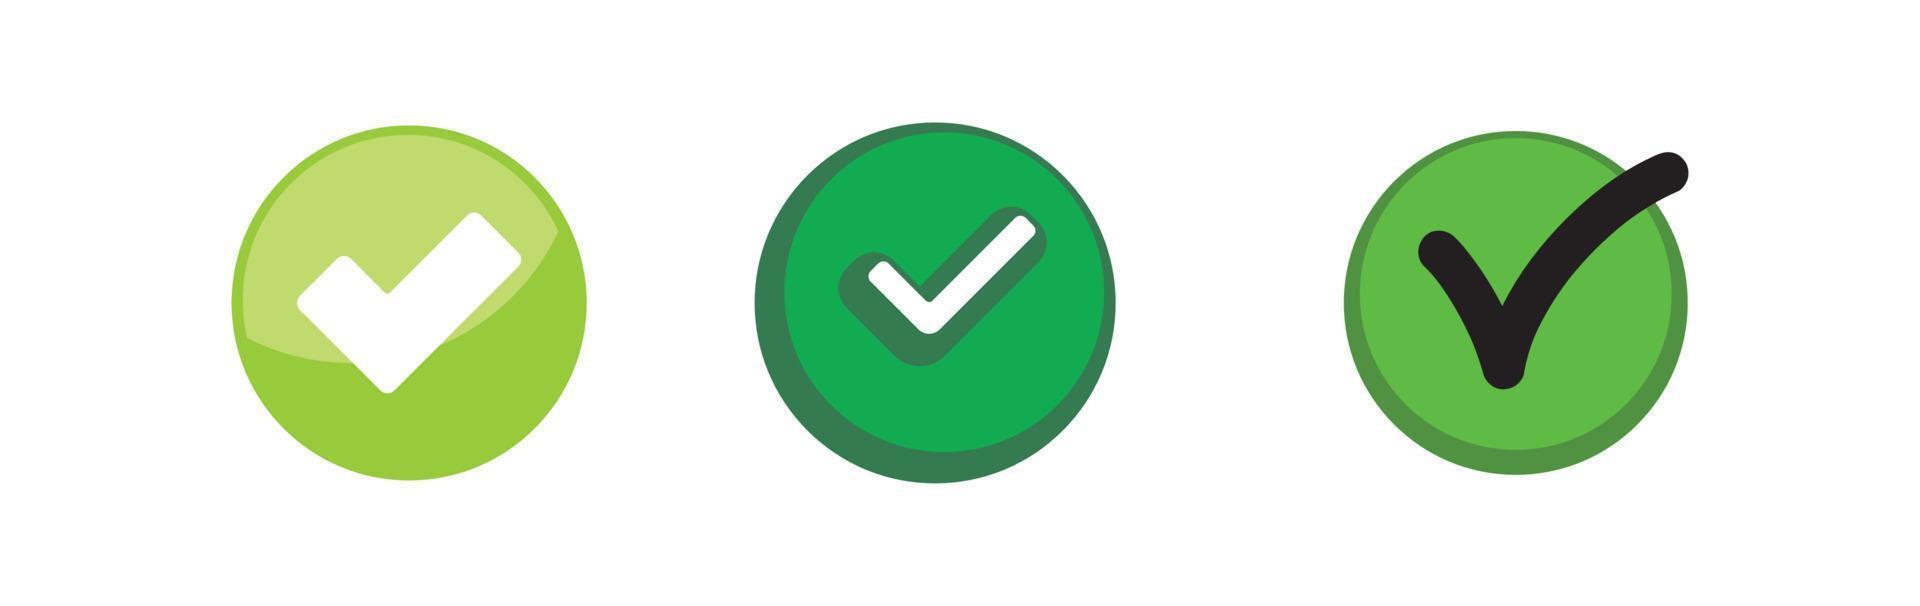 Check mark icons. Green tick approval. vector